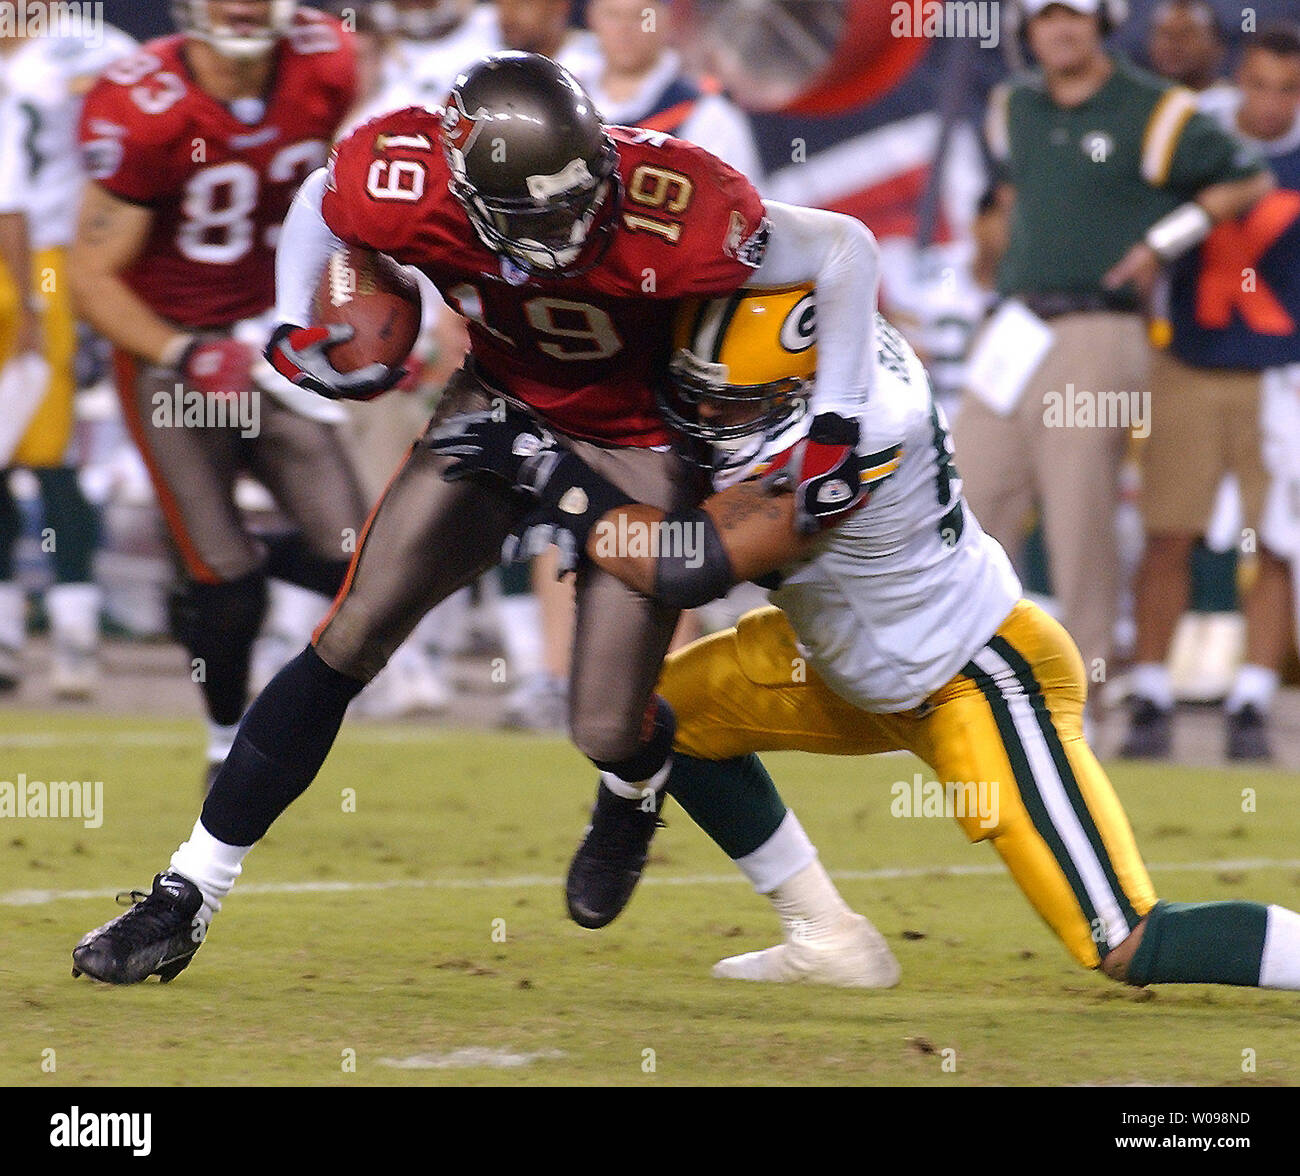 Tampa Bay Buccaneers' wide receiver Keyshawn Johnson (19) tries to